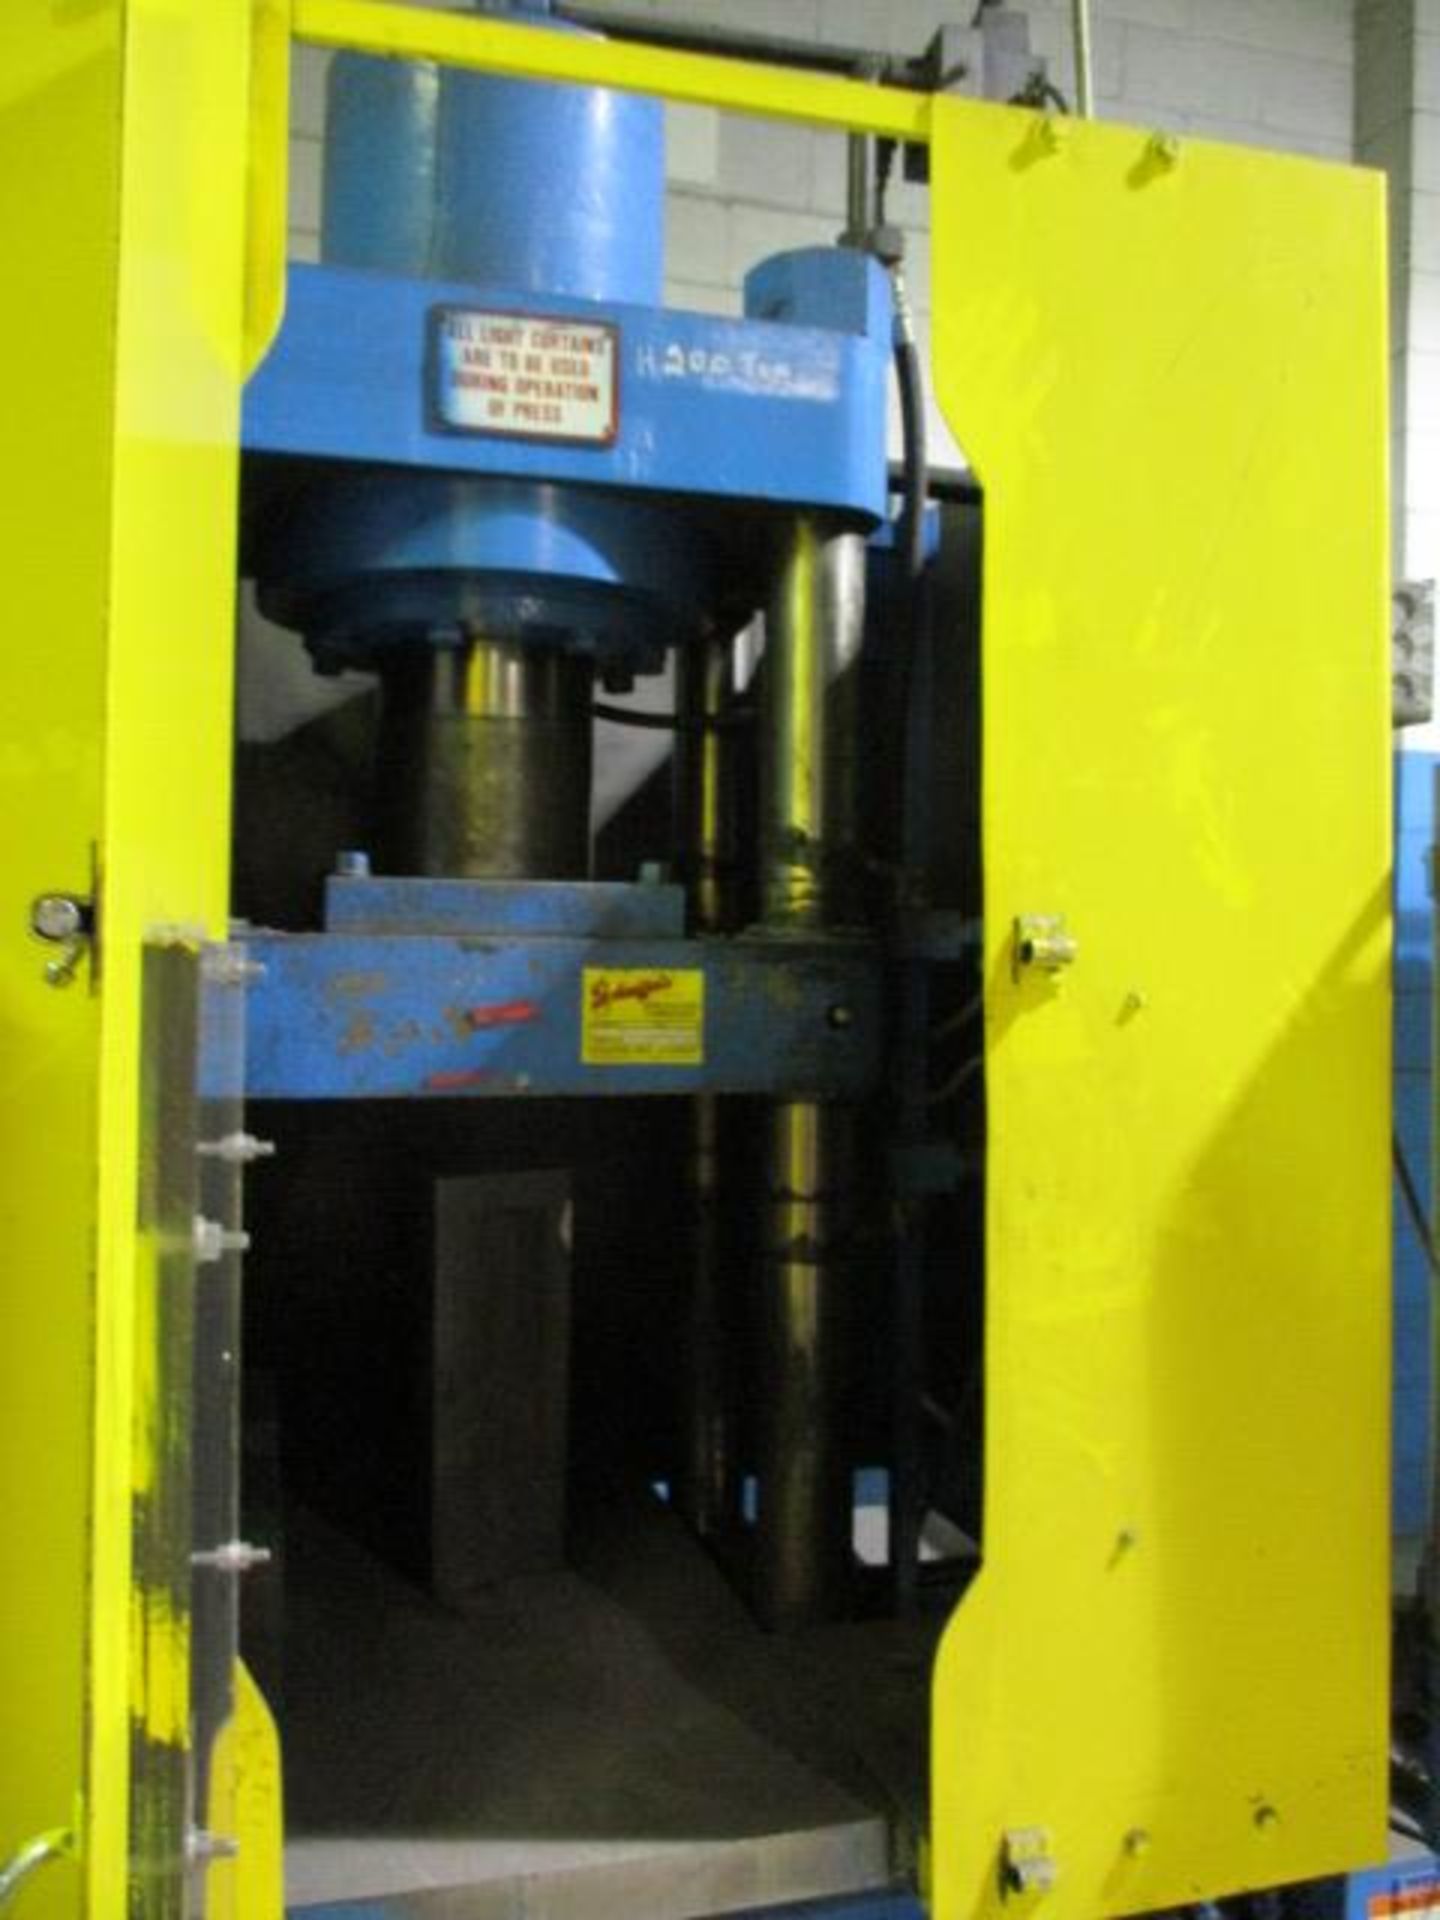 Mohr/Modern Hydraulic Corp Model IR 200 Ton Compaction Press - Image 3 of 6